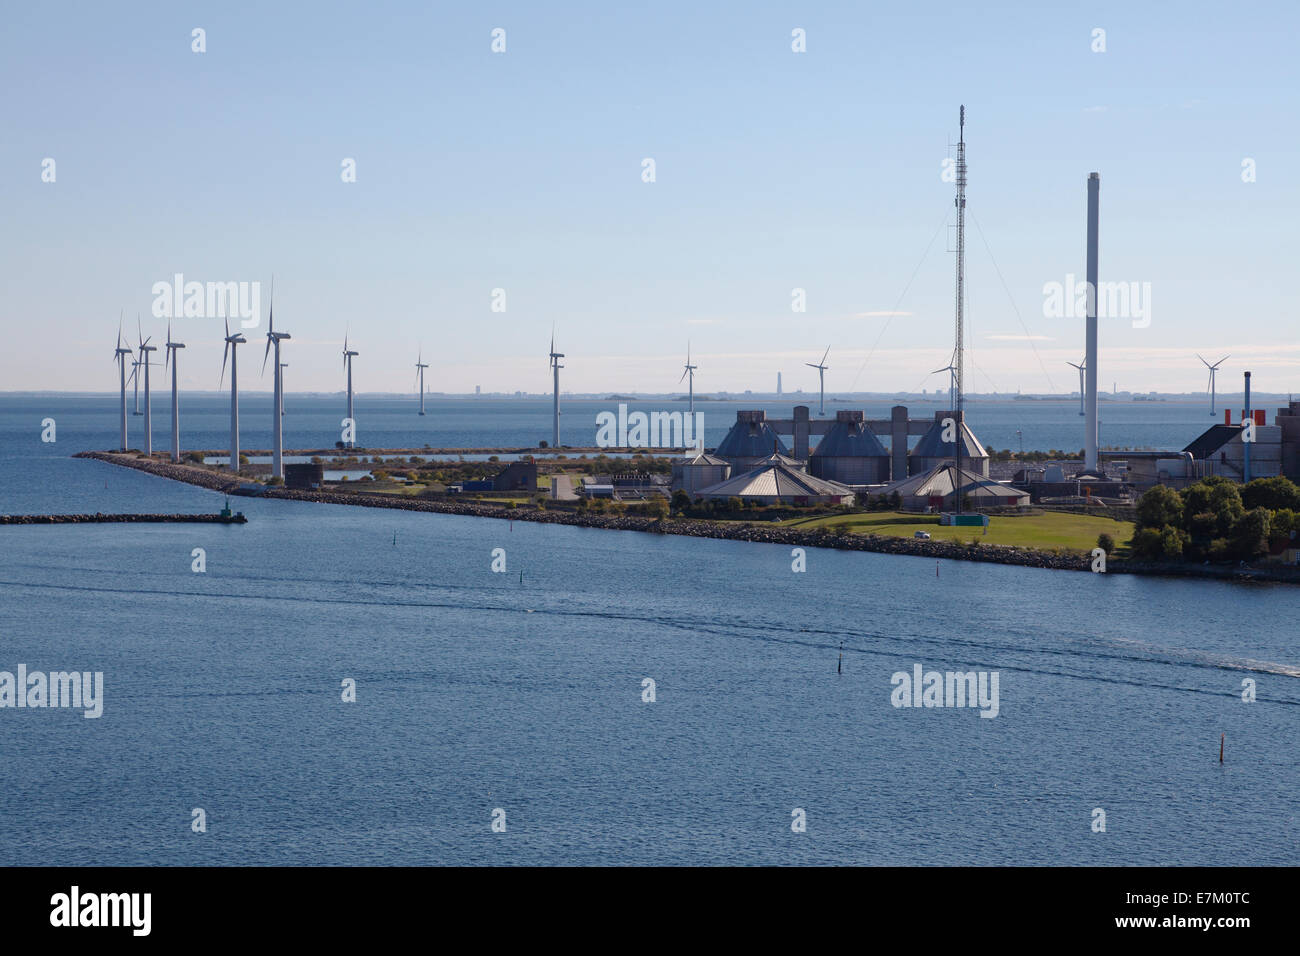 Lynetten wastewater treatment plant and wind turbines along the yacht entrance, to the port of Copenhagen. Offshore wind park Middelgrund in distance. Stock Photo